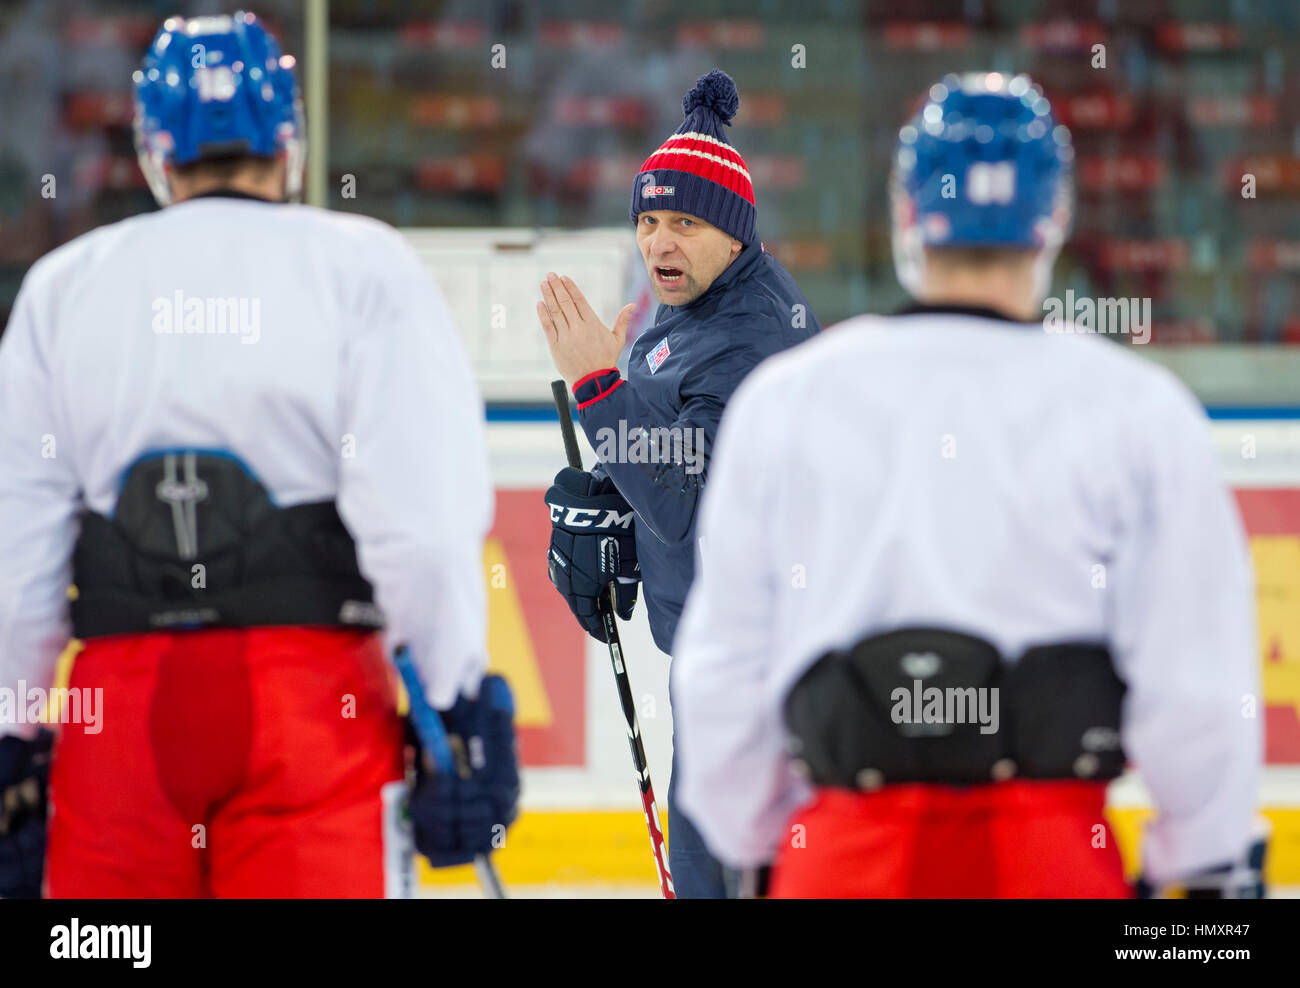 Prague, Czech Republic. 07th Feb, 2017. The Czech national ice-hockey team's coach Josef Jandac gestures during the training session prior to the February Sweden Games in Gothenburg in Prague, Czech Republic, February 7, 2017. Sweden Games, the third part of the European Hockey Tour (EHT) series, will take place on February 9-12. Credit: Vit Simanek/CTK Photo/Alamy Live News Stock Photo